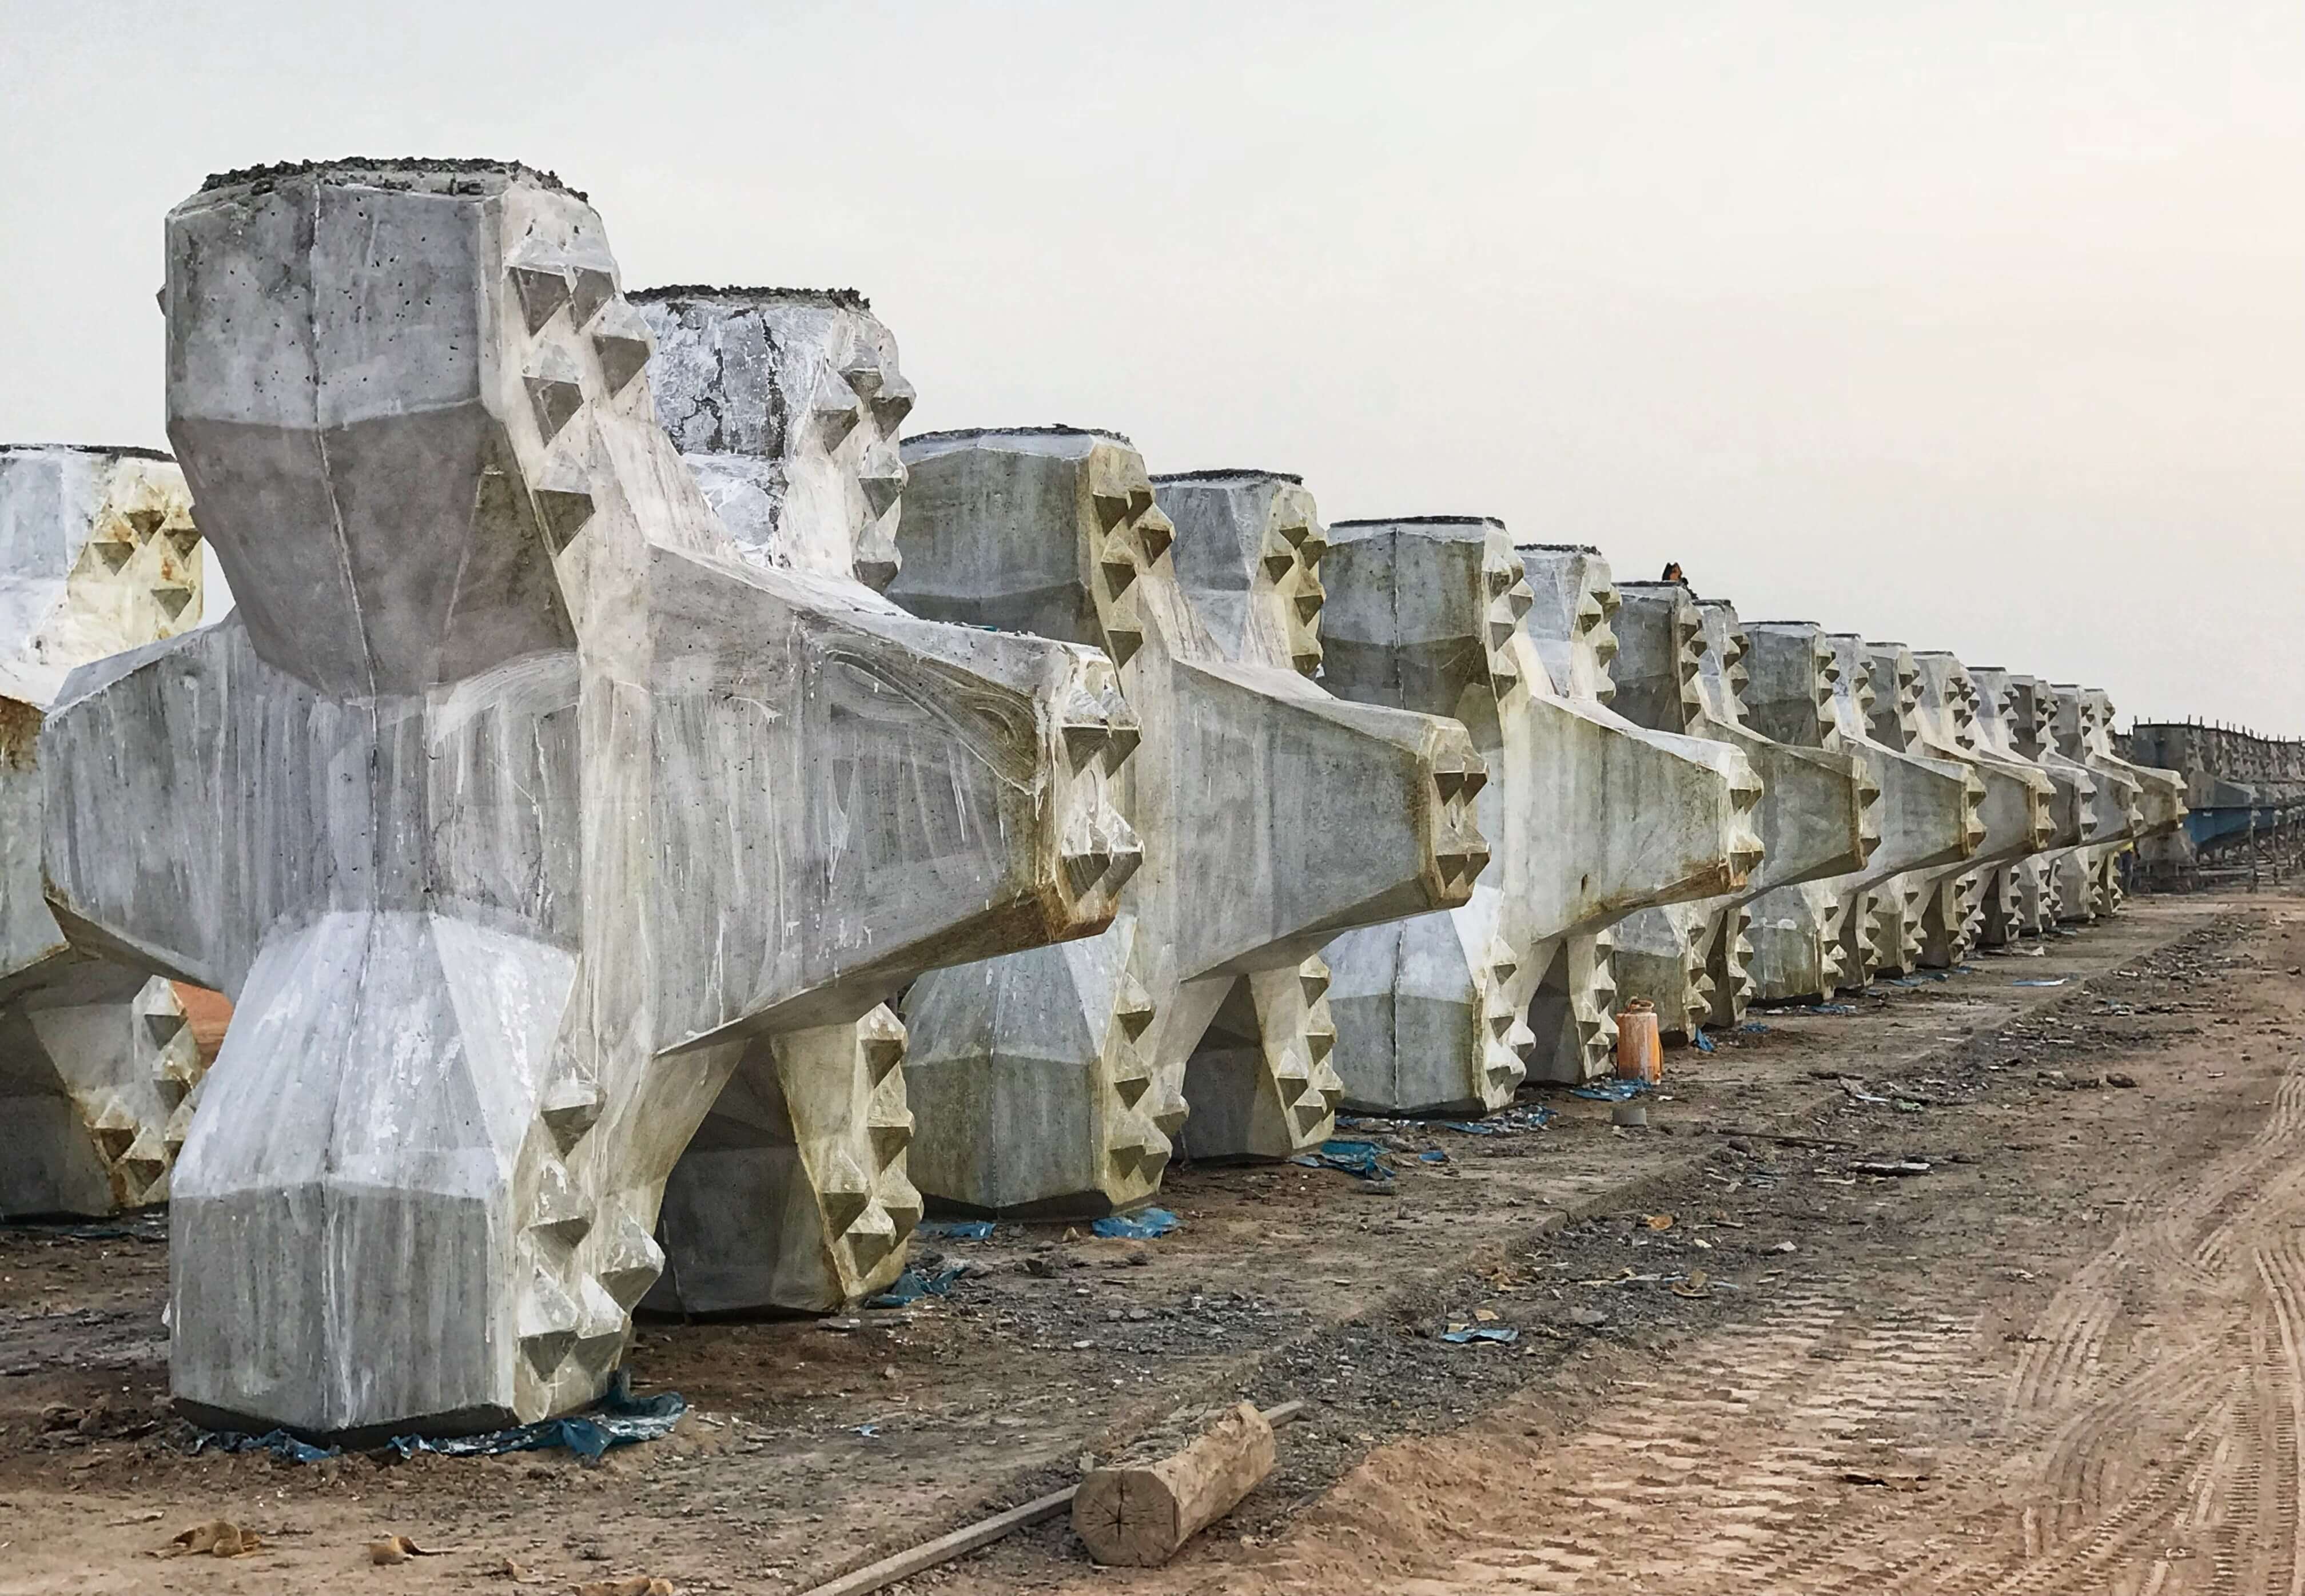 Around 10,837 accropodes were required for south breakwater, which were manufactured at site in just 11 months;<br />Type-II accropodes are used for the first time in India